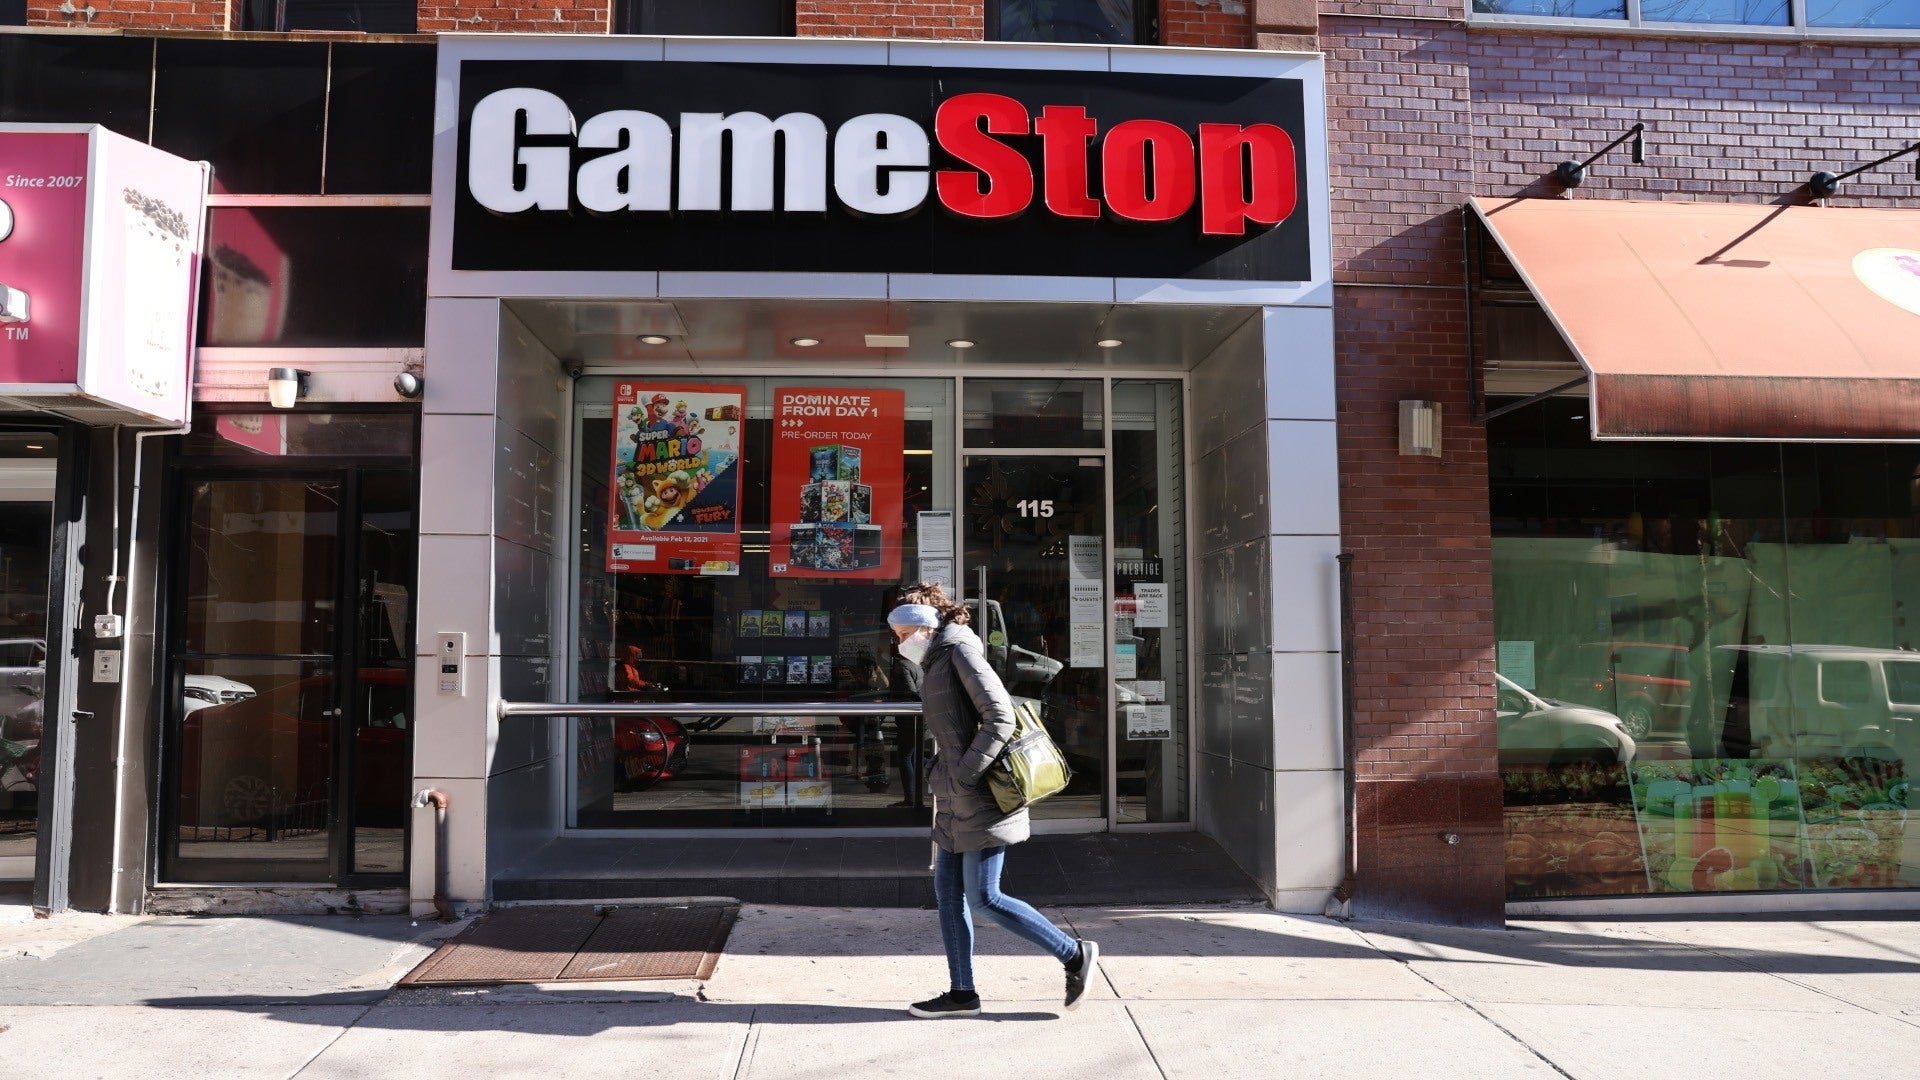 GameStop Stock Shrimp TV Sequence In the Works, Too